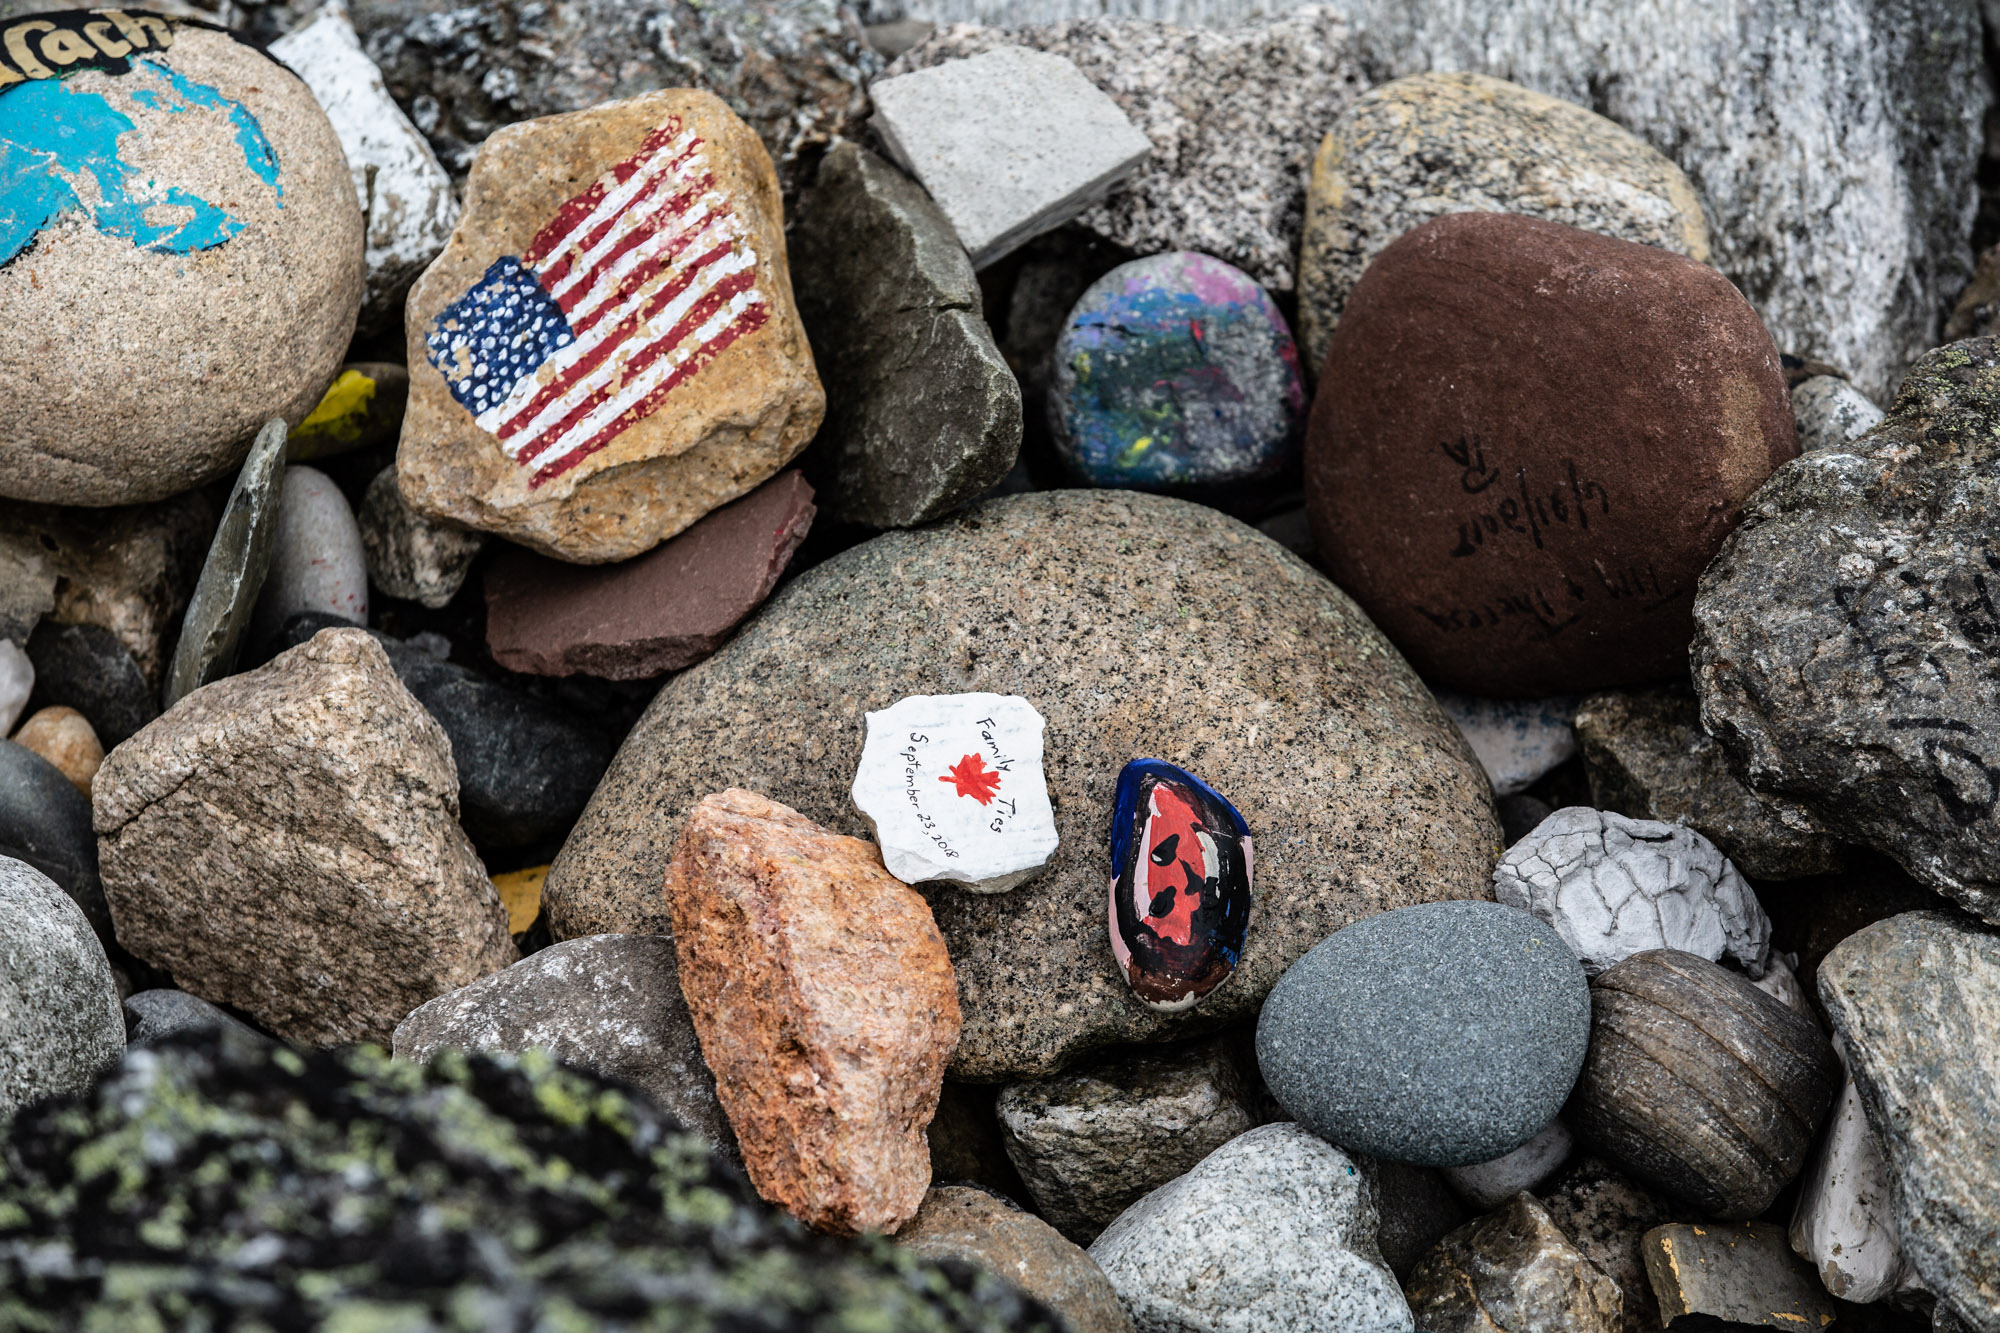 Hand painted rocks with fun messages